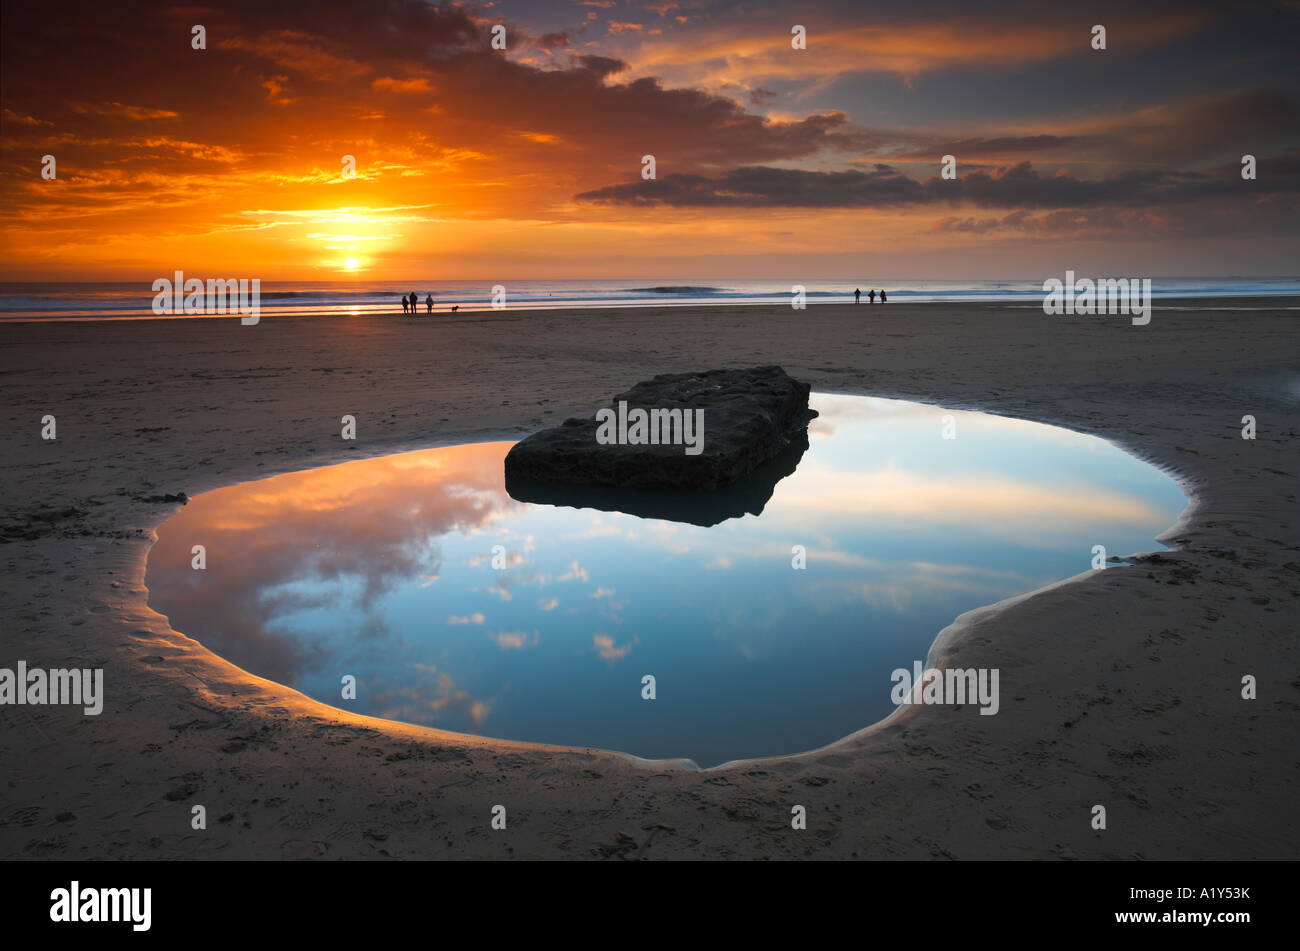 Dunraven Bay rockpool and people at sunset, Southerndown, Wales Stock Photo